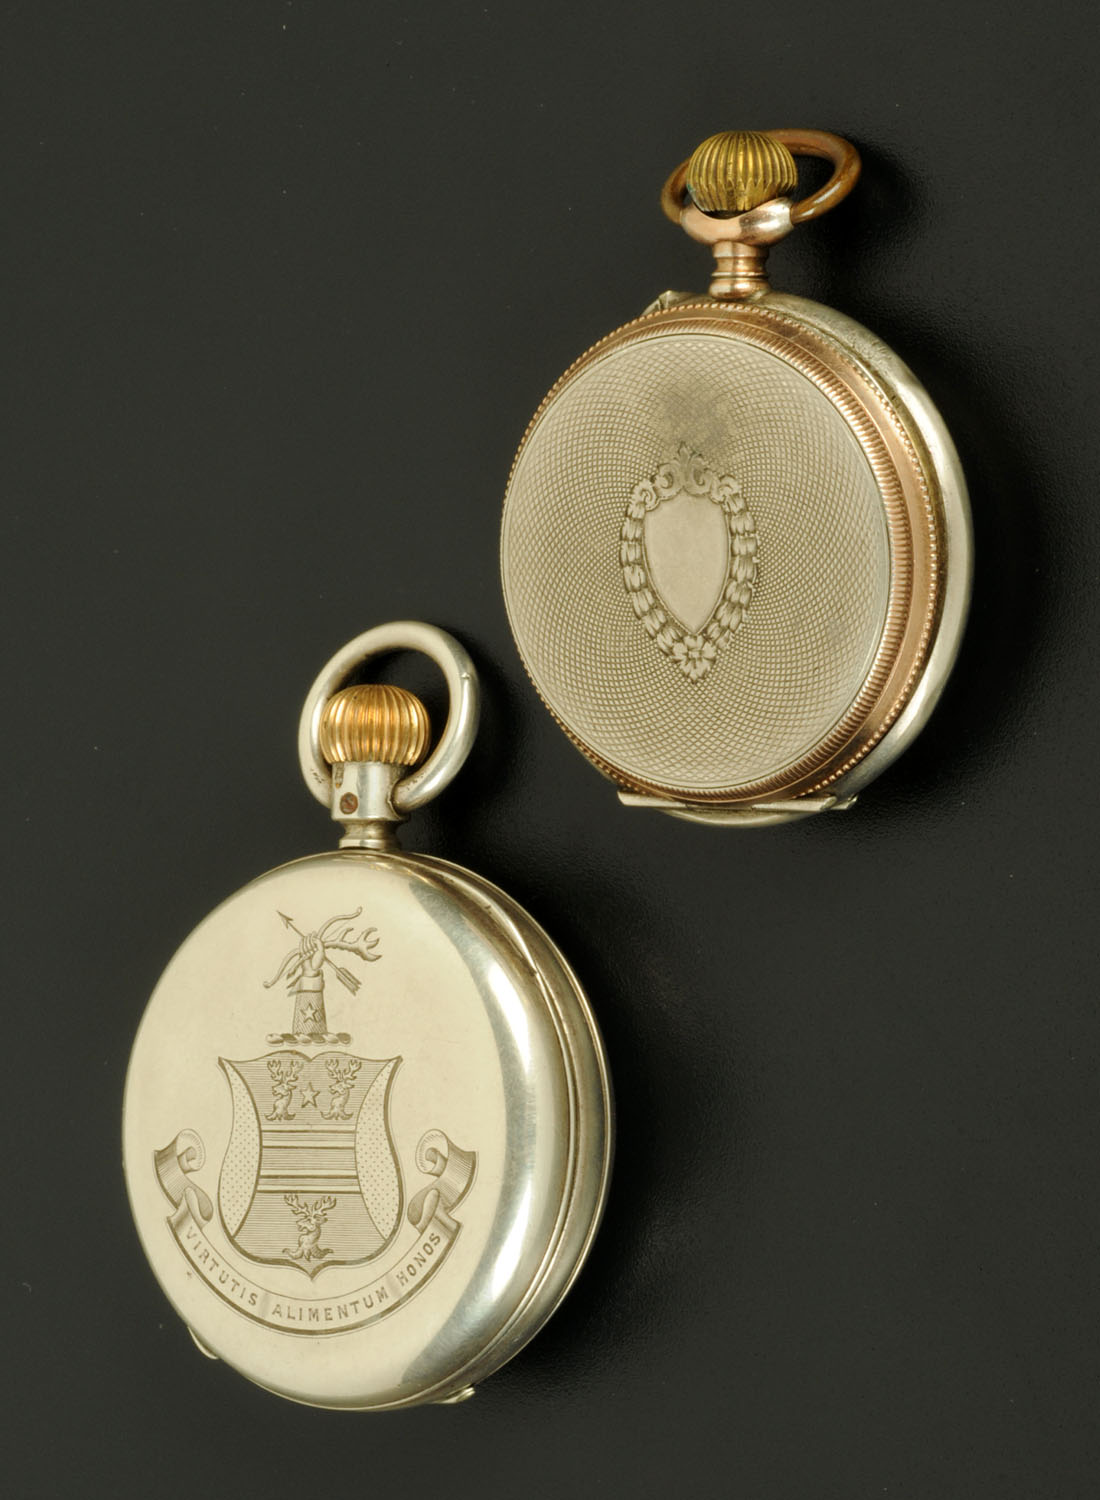 A silver cased pocket watch, by Carrington & Co. - Image 3 of 3